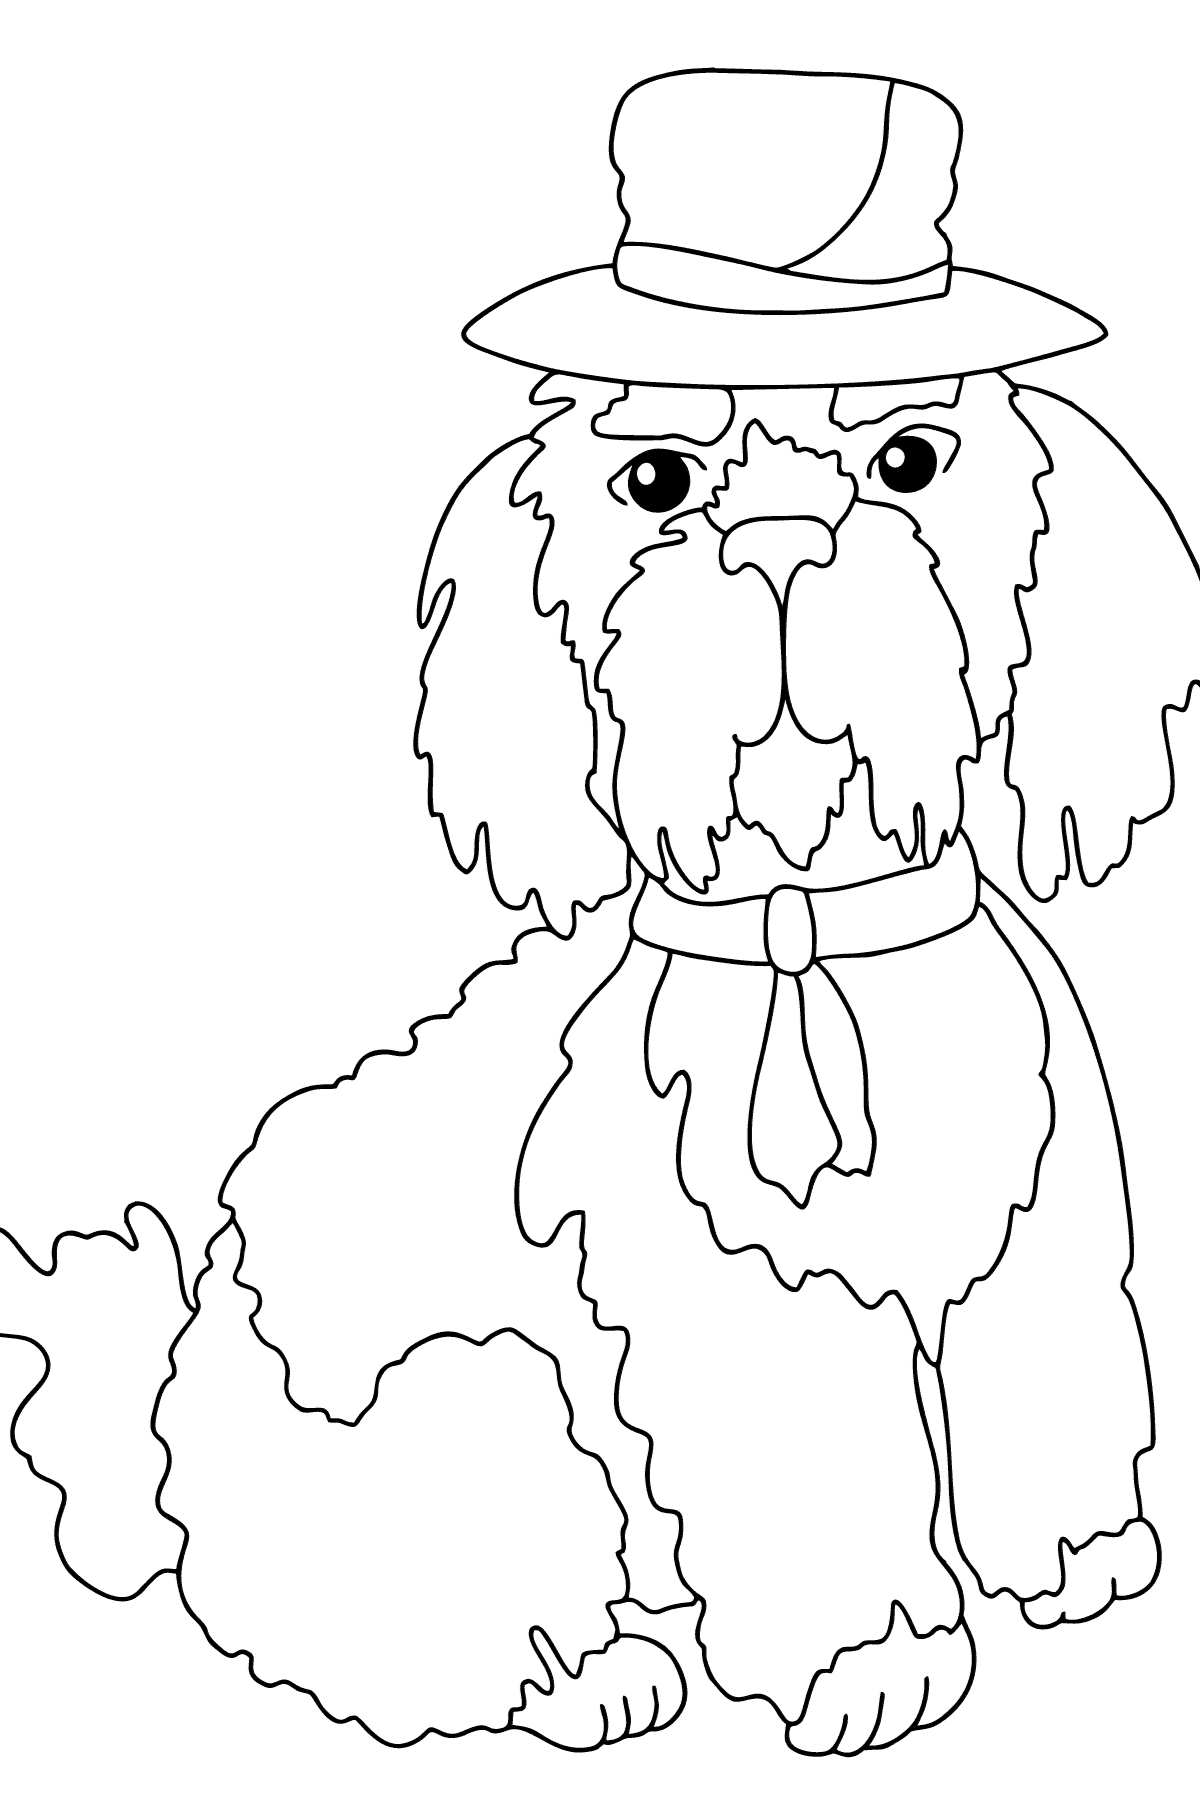 Coloring Page - A Dog in a Beautiful Hat for Children 